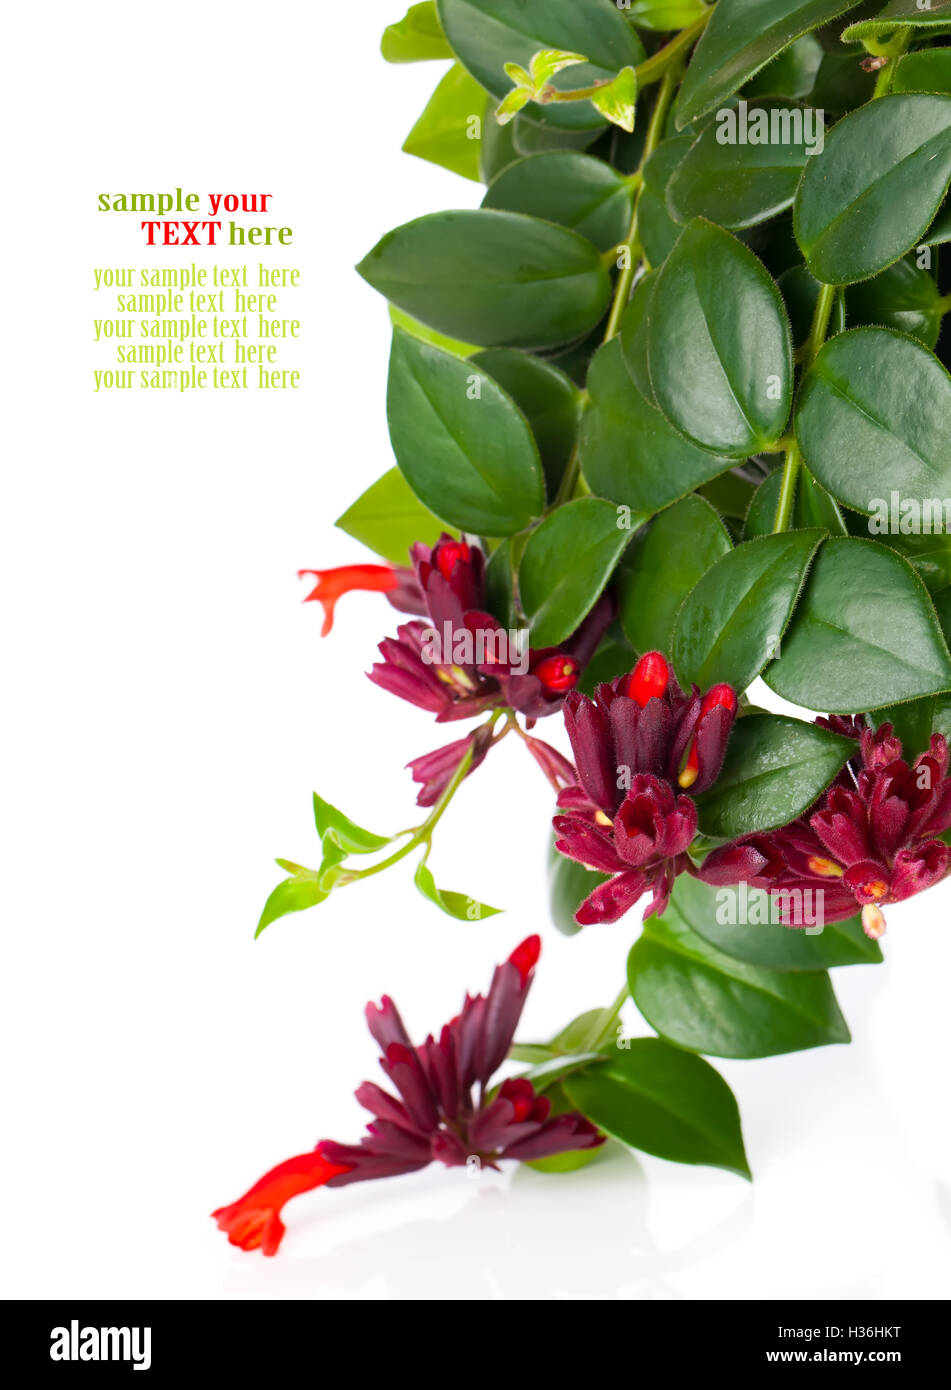 Lipstick Plant (Aeschynanthus radicans) in pot, isolated on whit Stock Photo